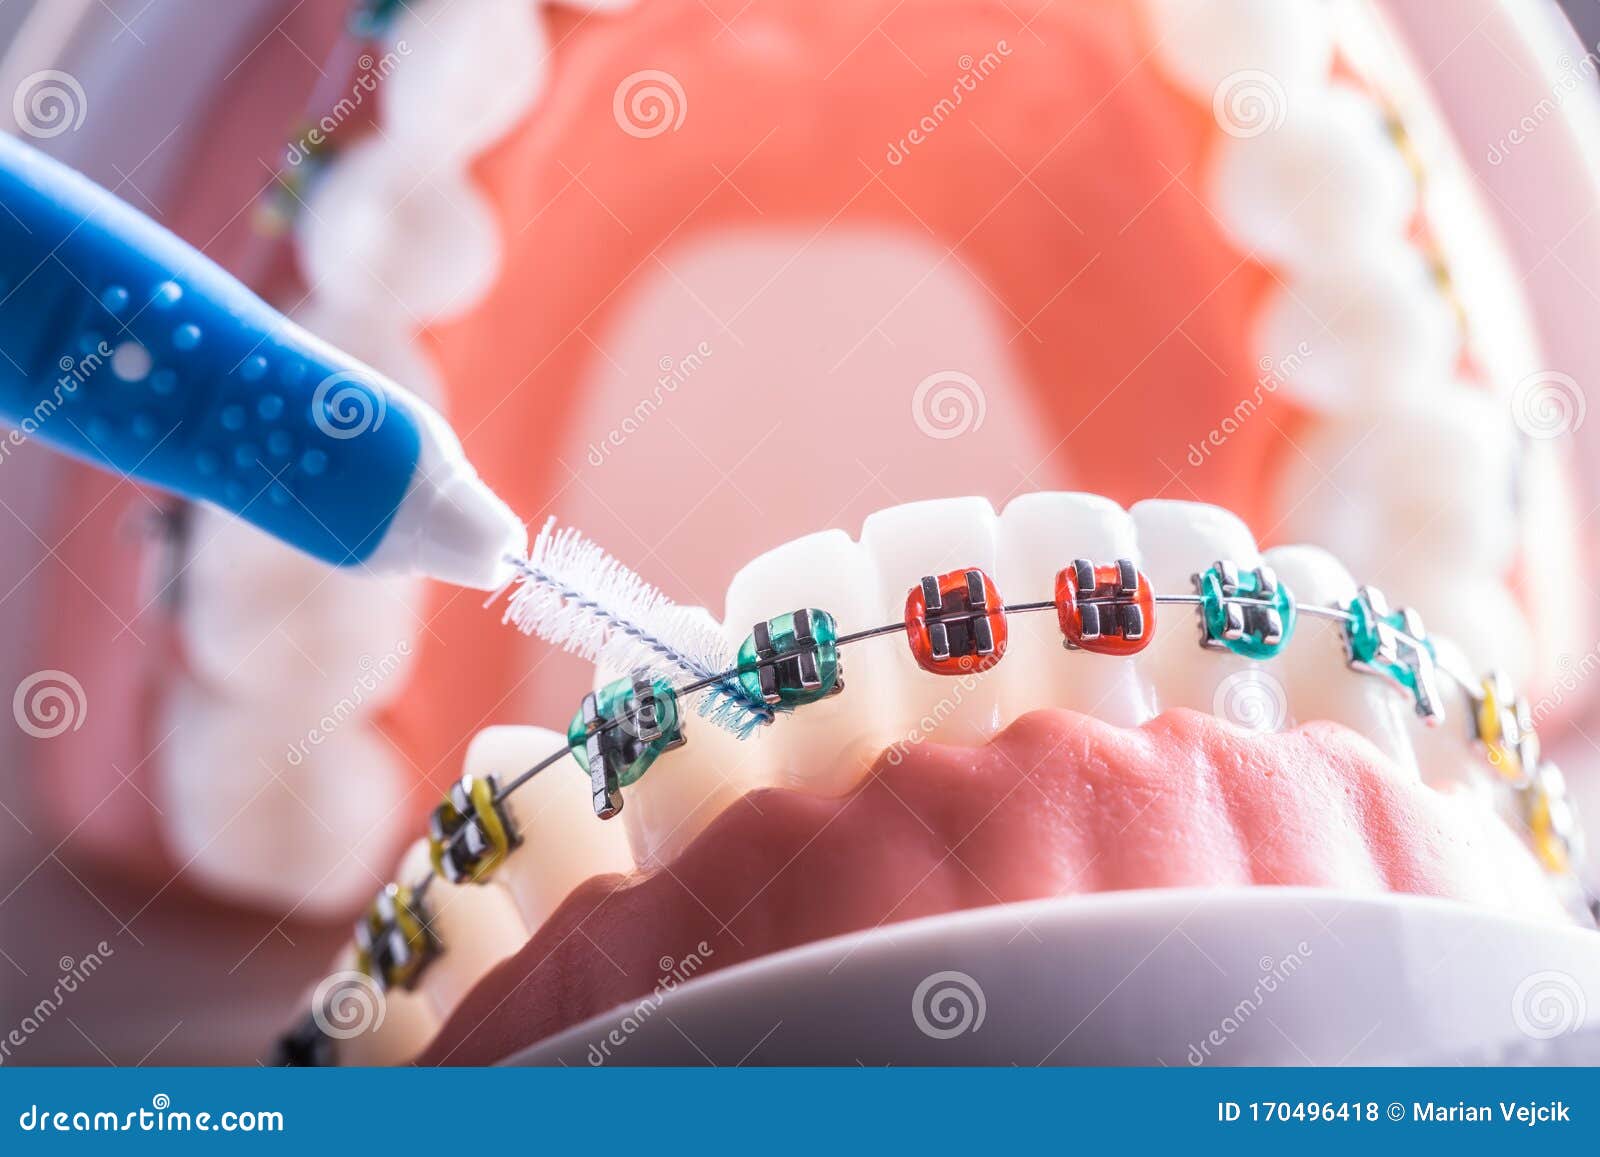 tooth model from dental braces with inter dental teeth cleaning brush